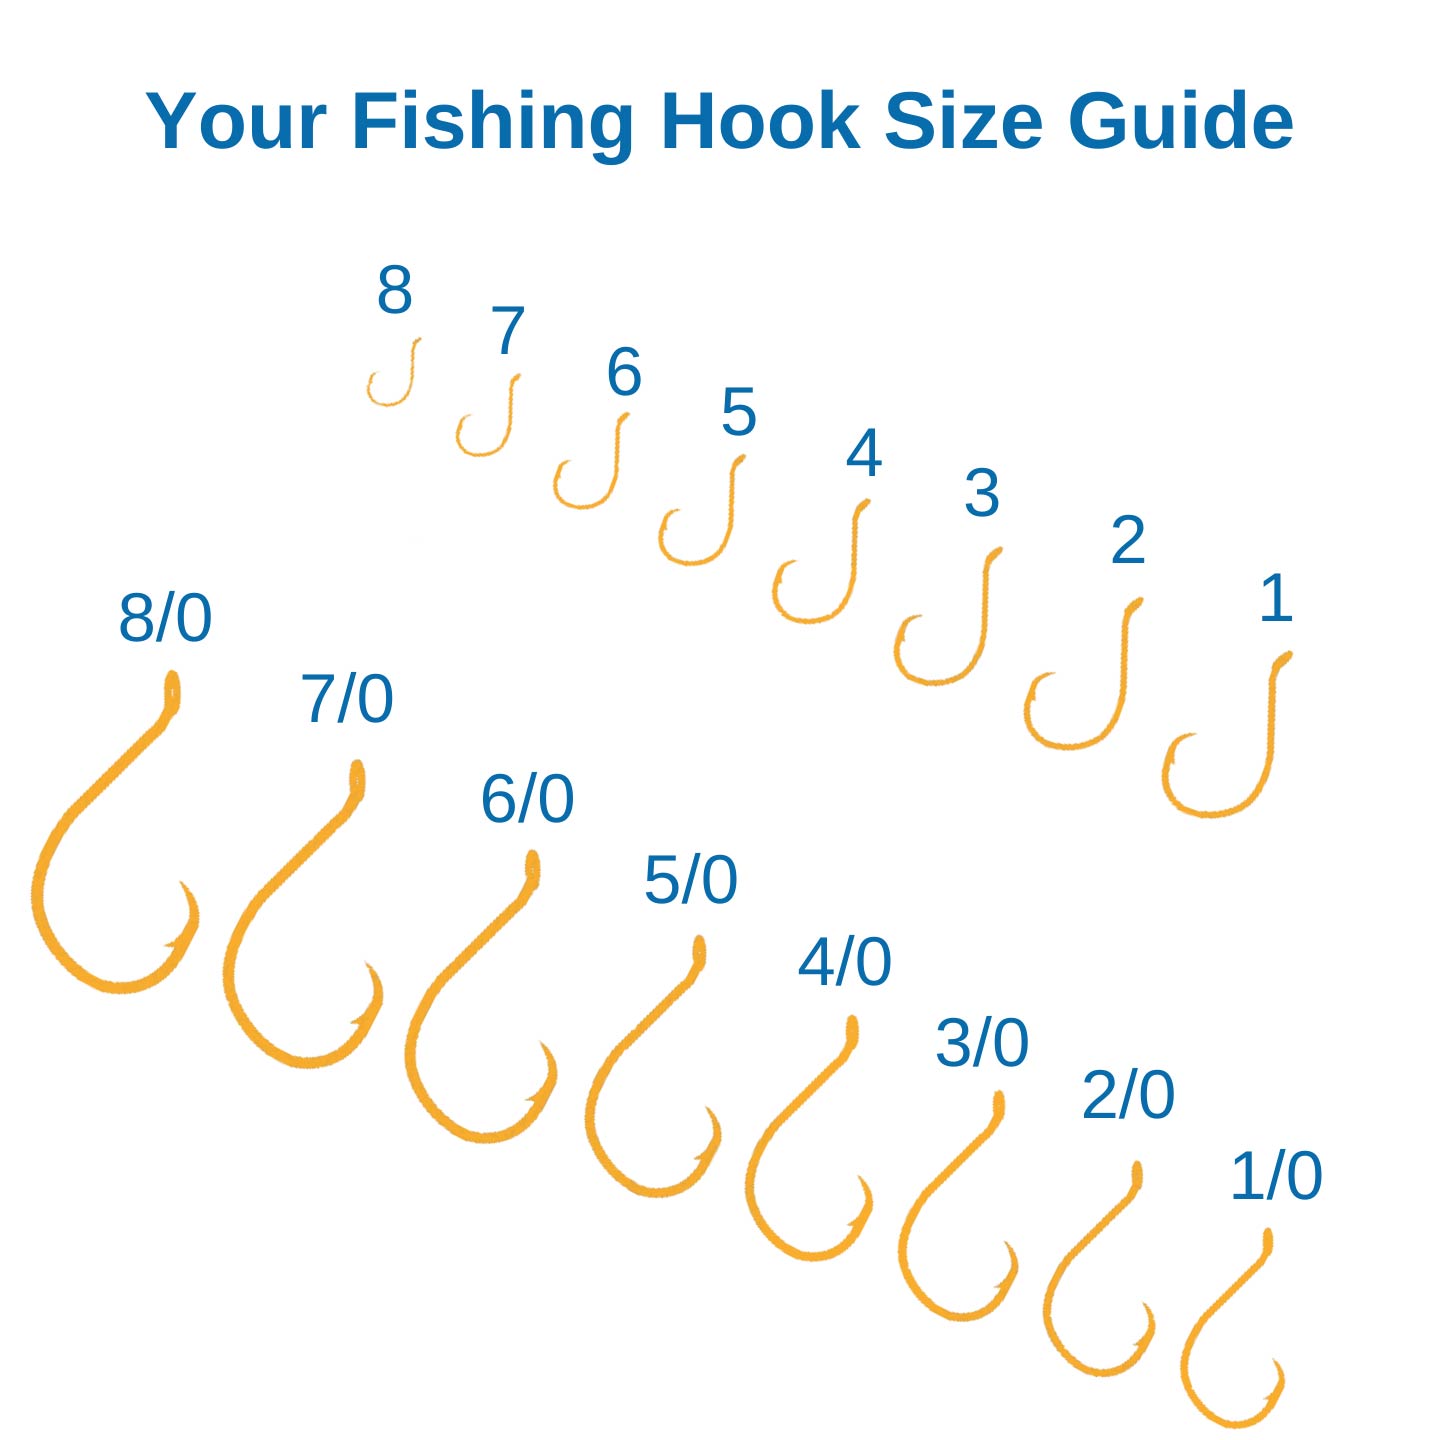 Fishing Hooks 101 Parts, Sizes, Types, and More